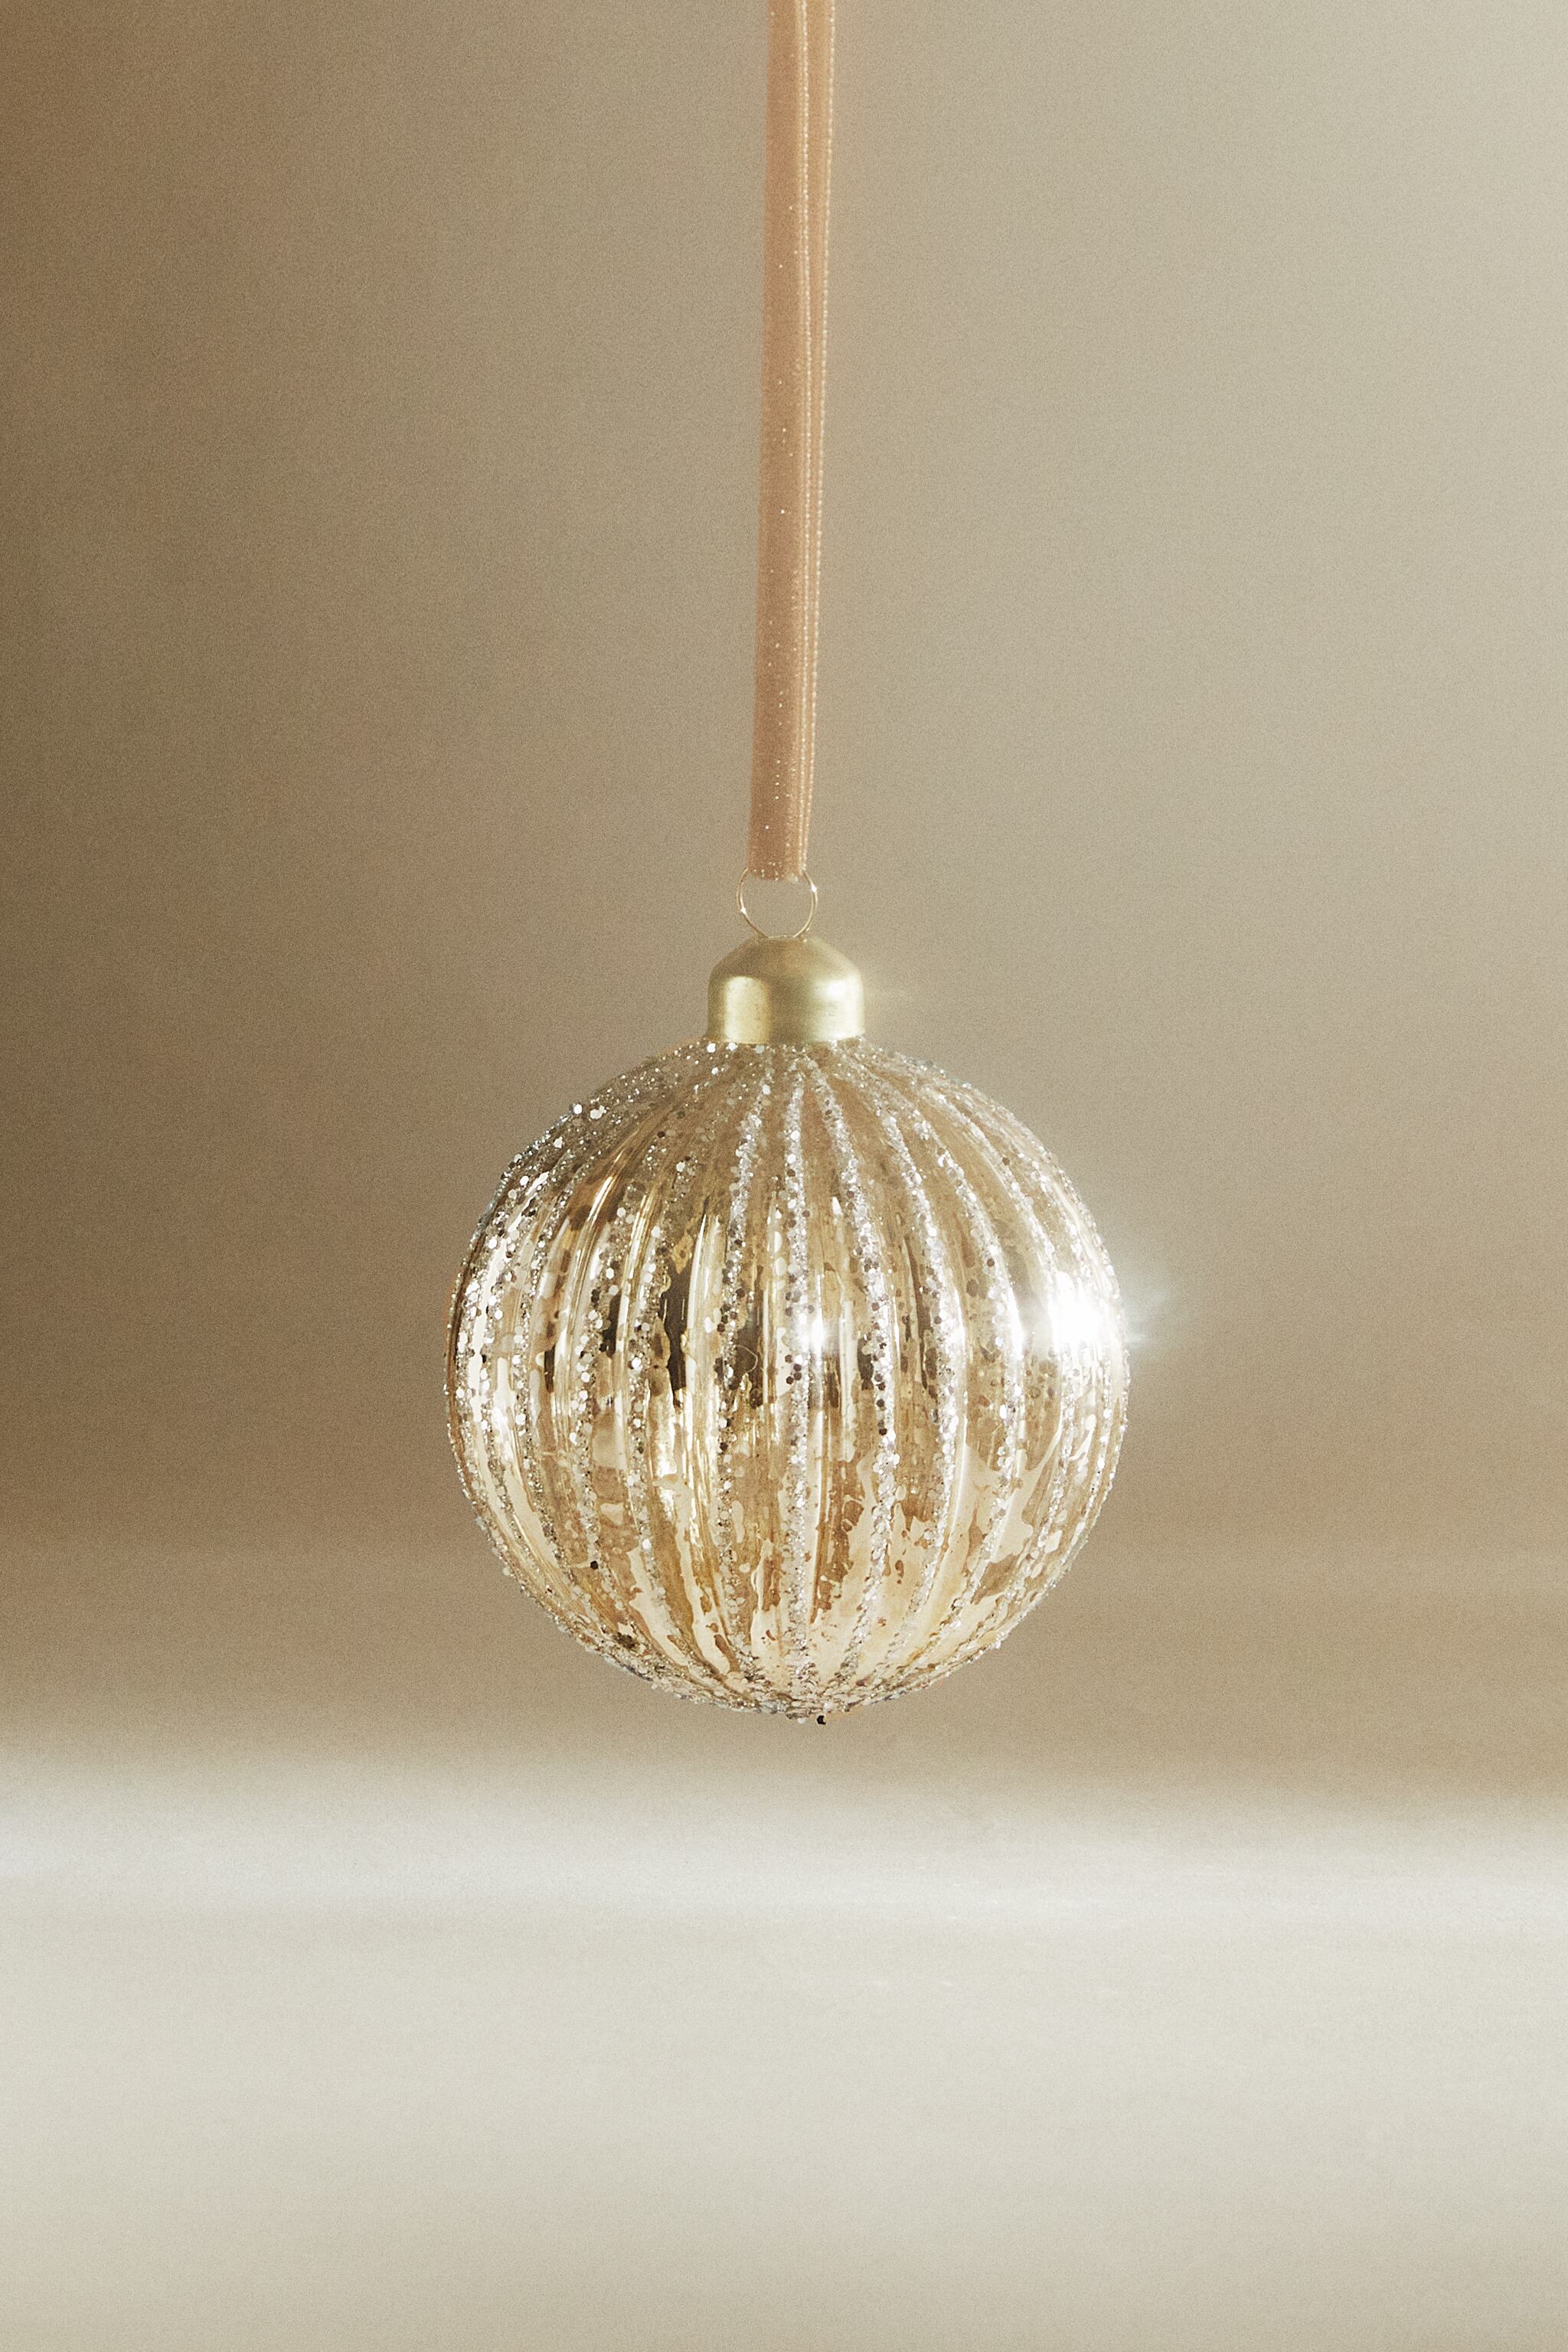 MERCURIZED CHRISTMAS ORNAMENT WITH RAISED DESIGN